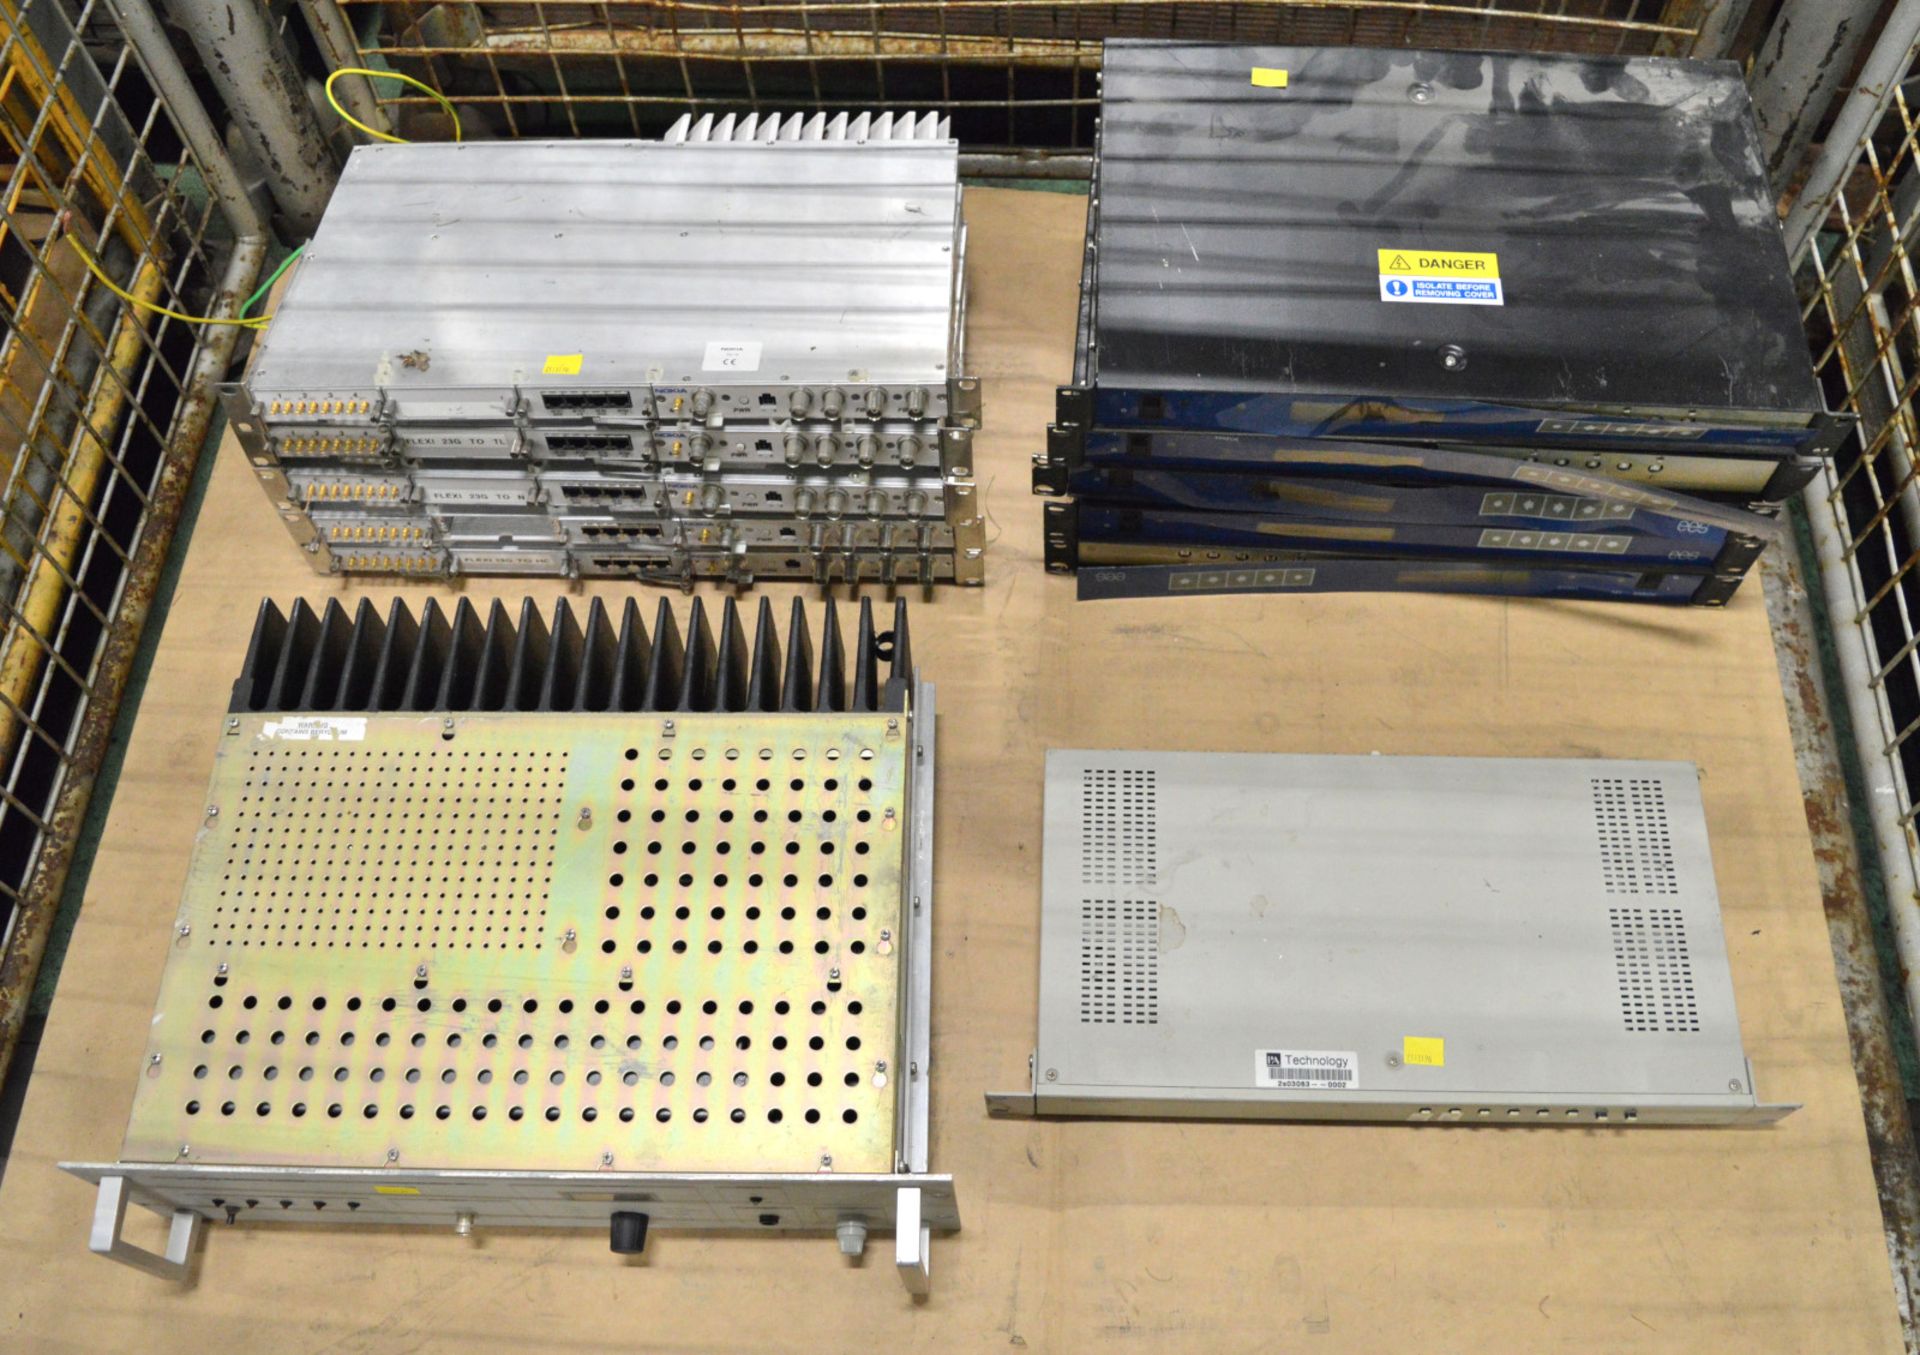 Paging Systems Ltd Transmitter Model 600, Associated 19" Rack Modules. - Image 2 of 2